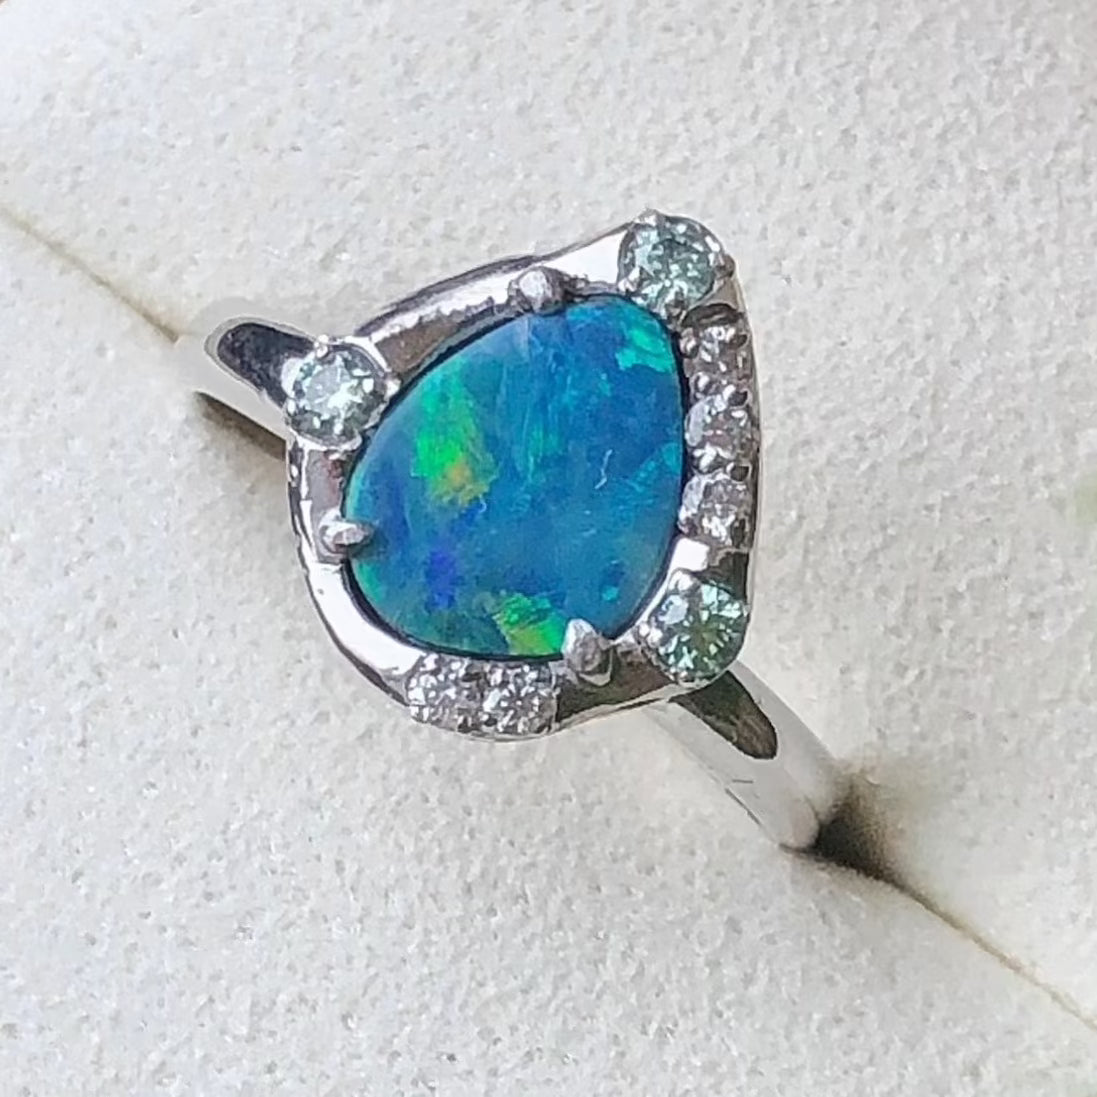 The Midnight Deep Blue Opal Engagement Ring - Size US6.5